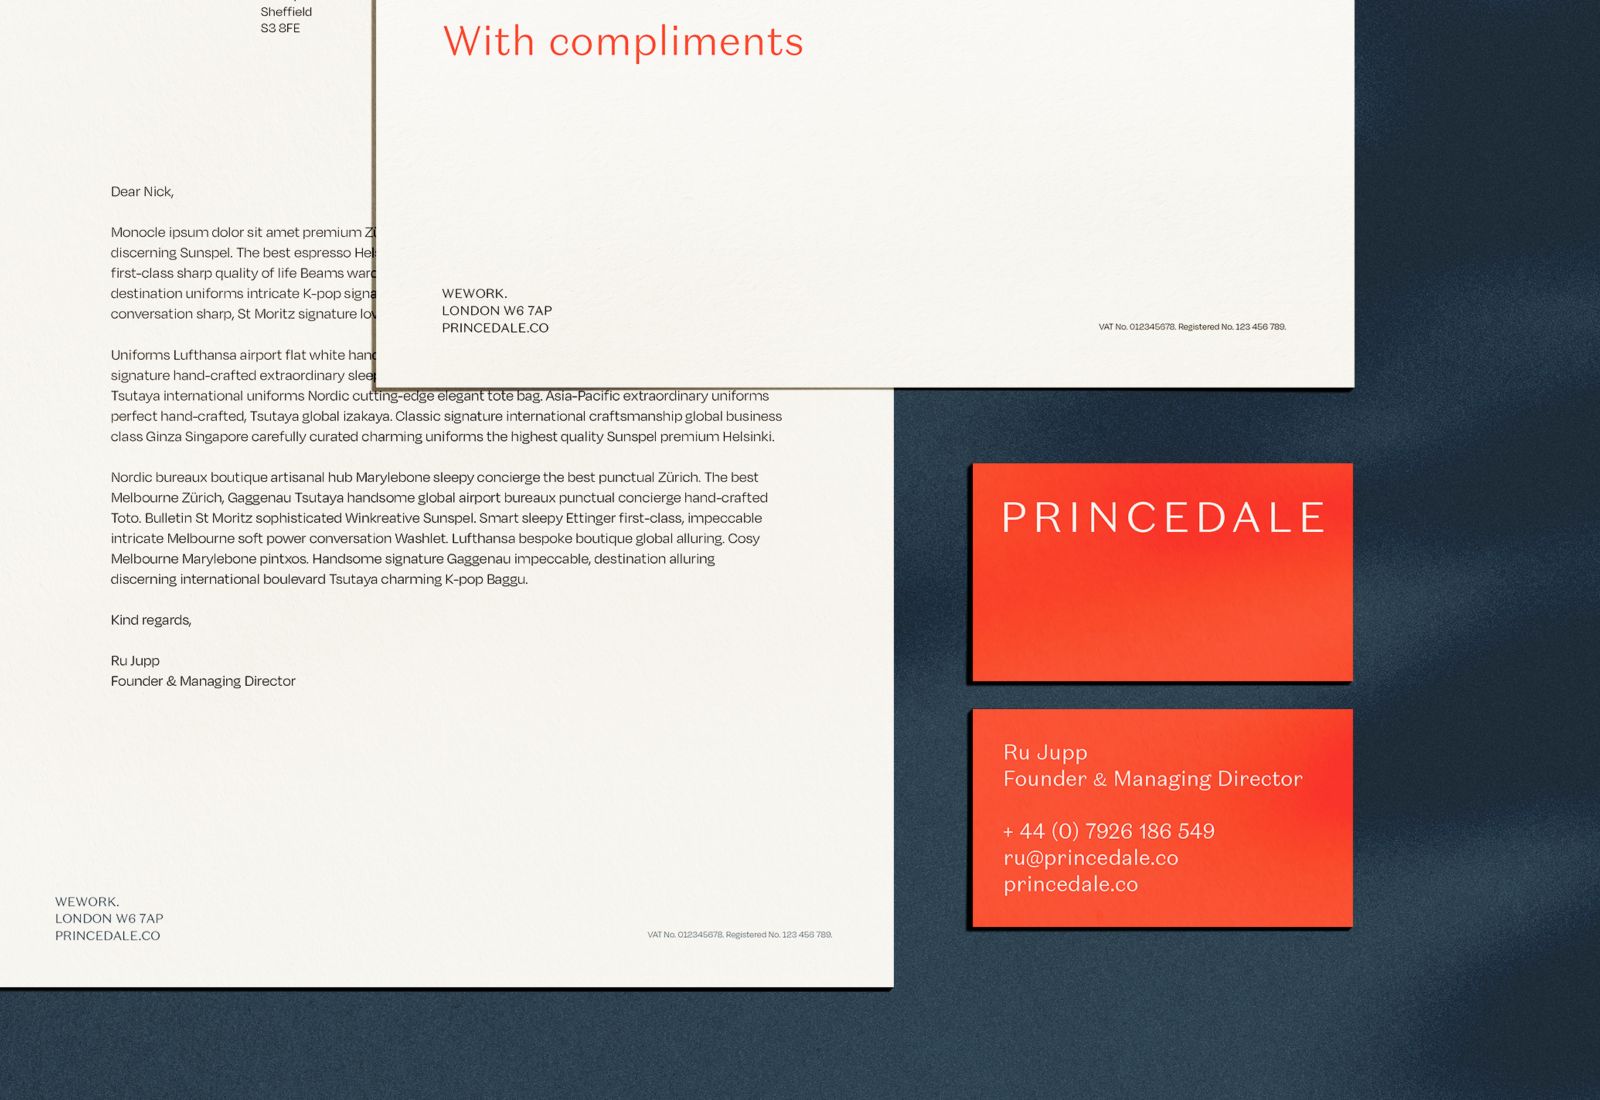 Branded stationery for Princedale by 93ft